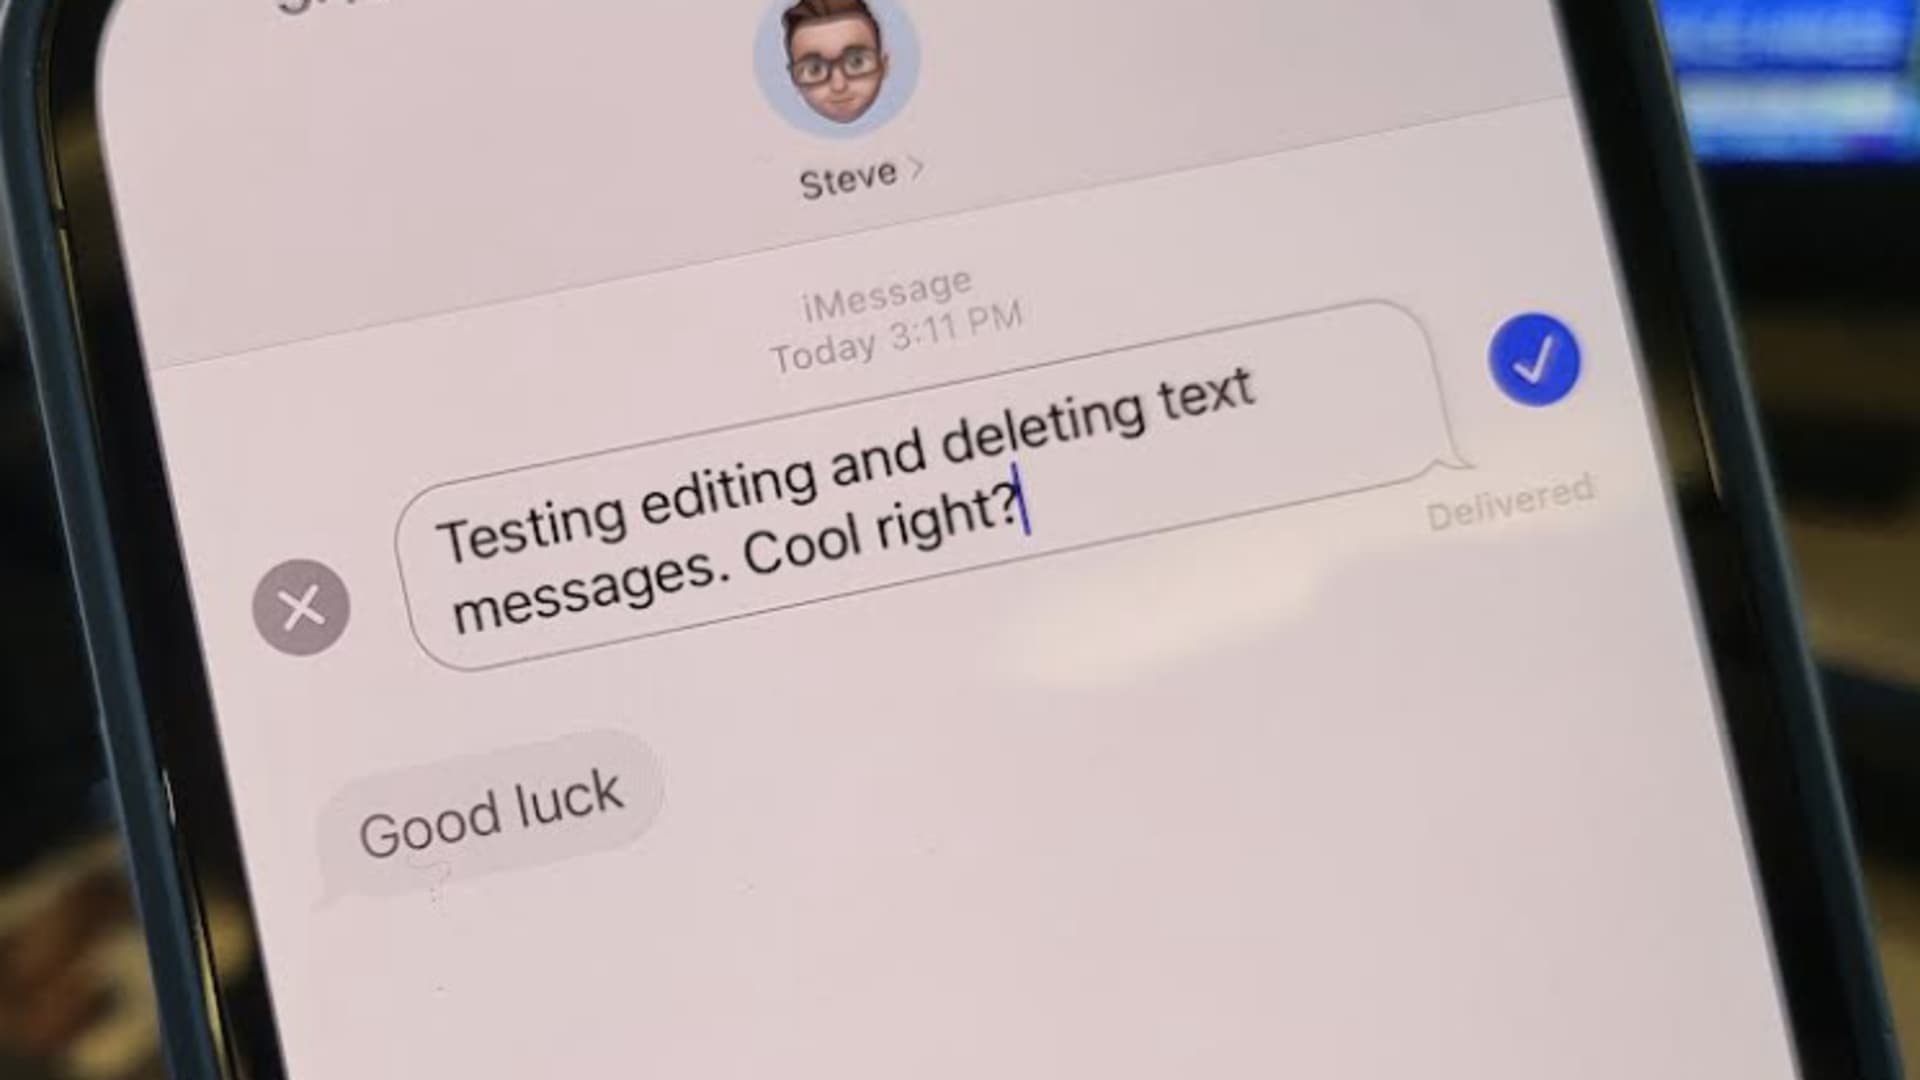 Soon you’ll be able to edit and unsend iMessages on iPhone. Here’s how it works